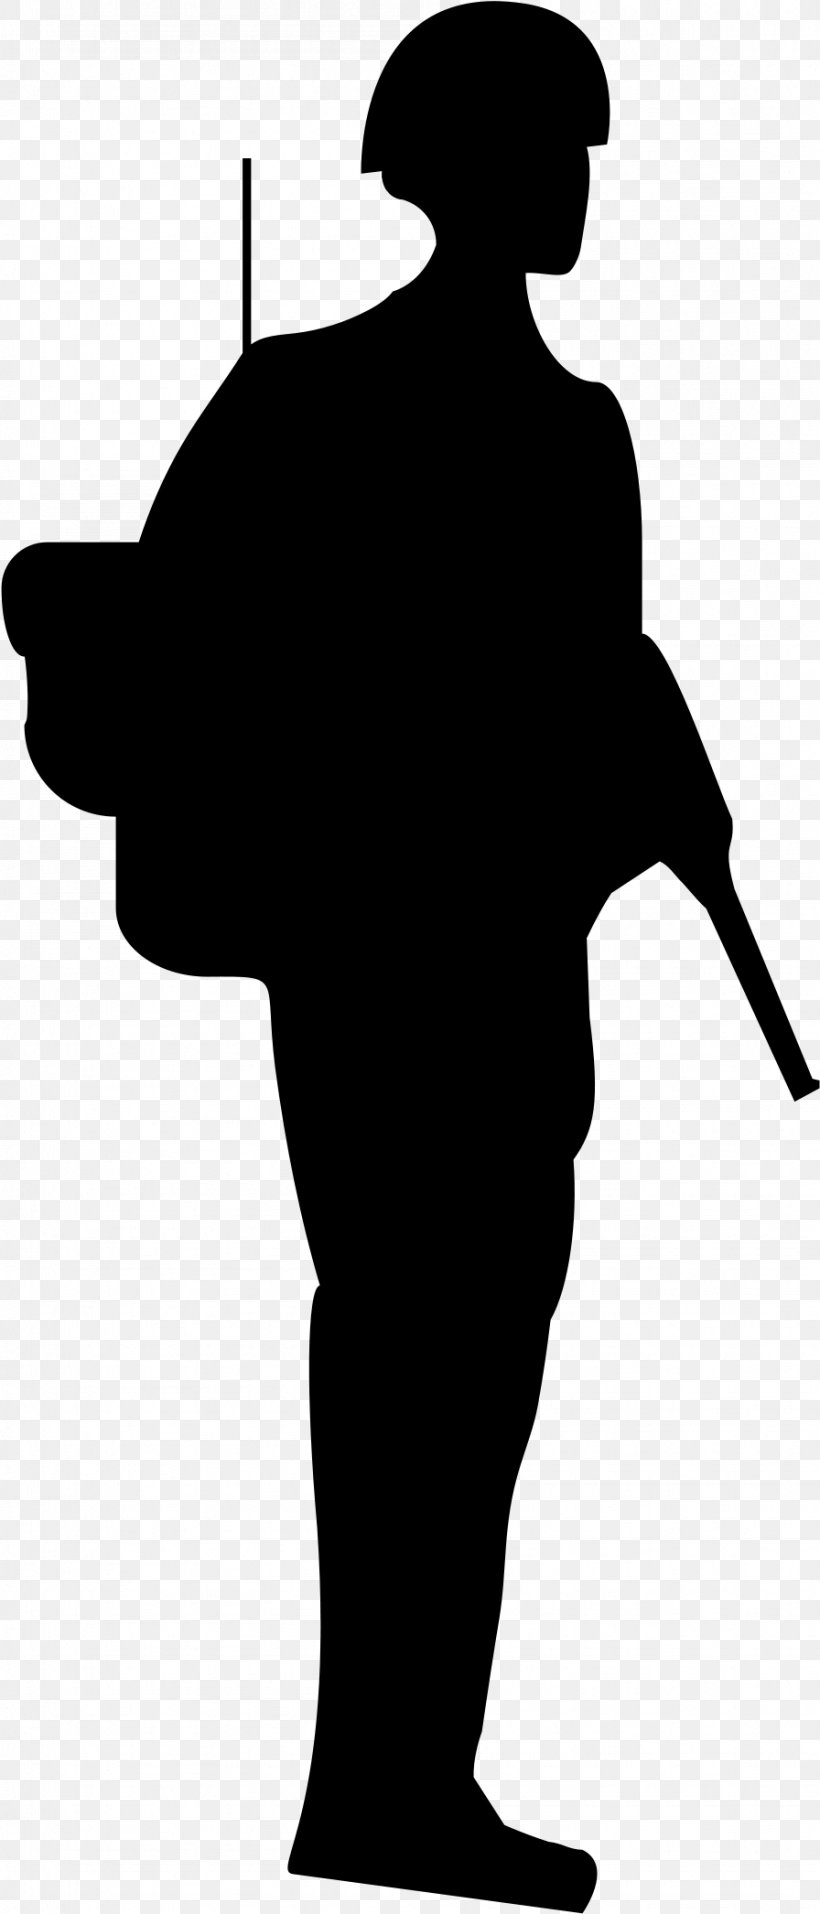 Soldier Silhouette, PNG, 896x2092px, Army, Blackandwhite, Military, Salute, Silhouette Download Free